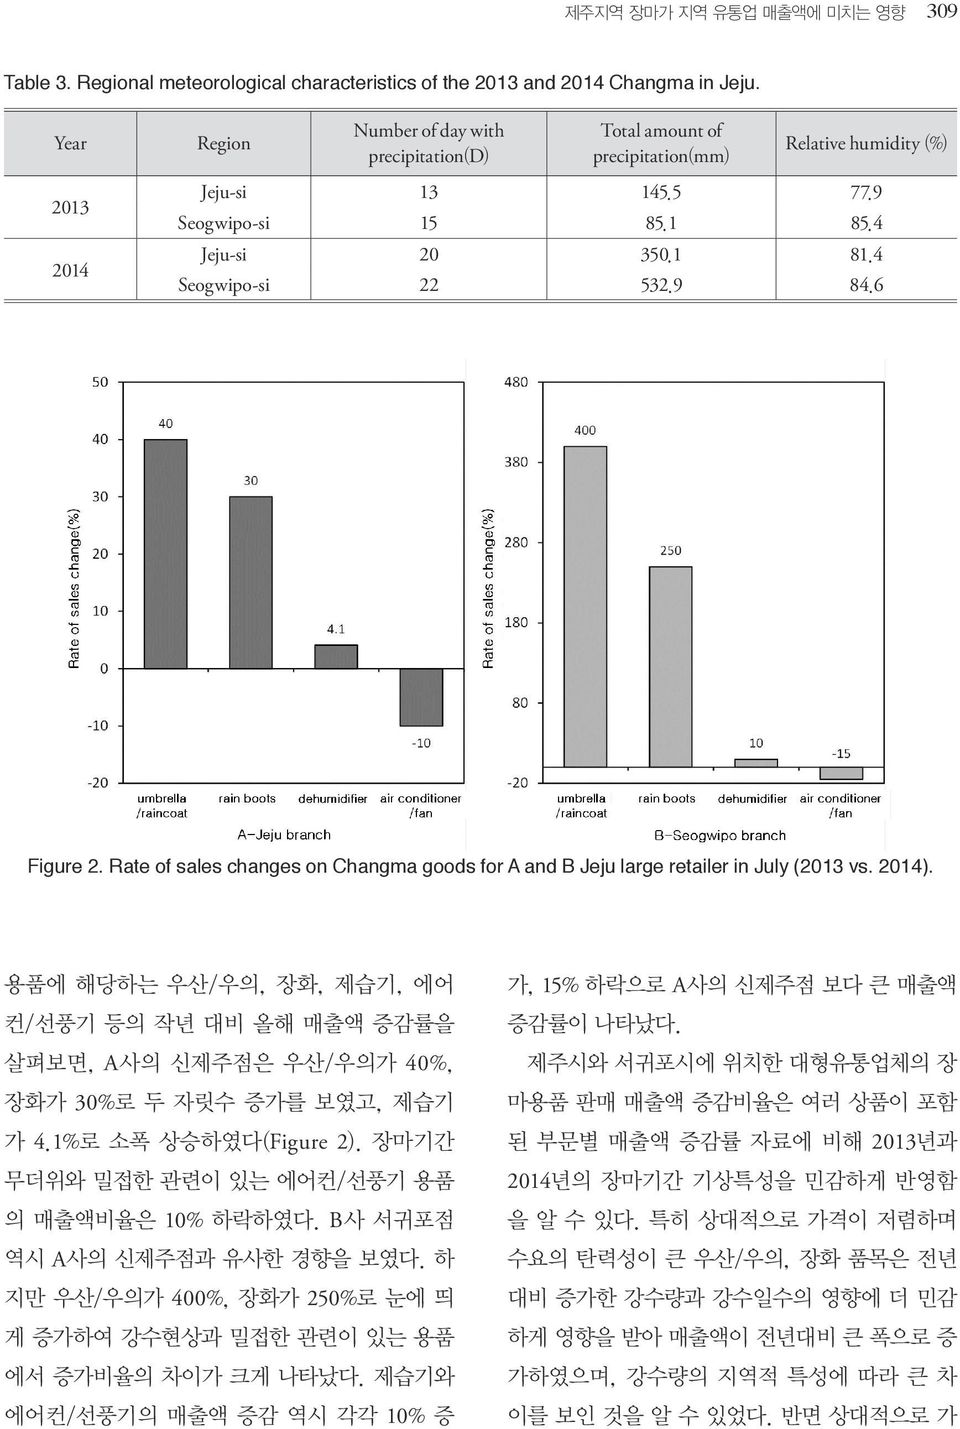 4 Seogwipo-si 22 532.9 84.6 Figure 2. Rate of sales changes on Changma goods for A and B Jeju large retailer in July (2013 vs. 2014).